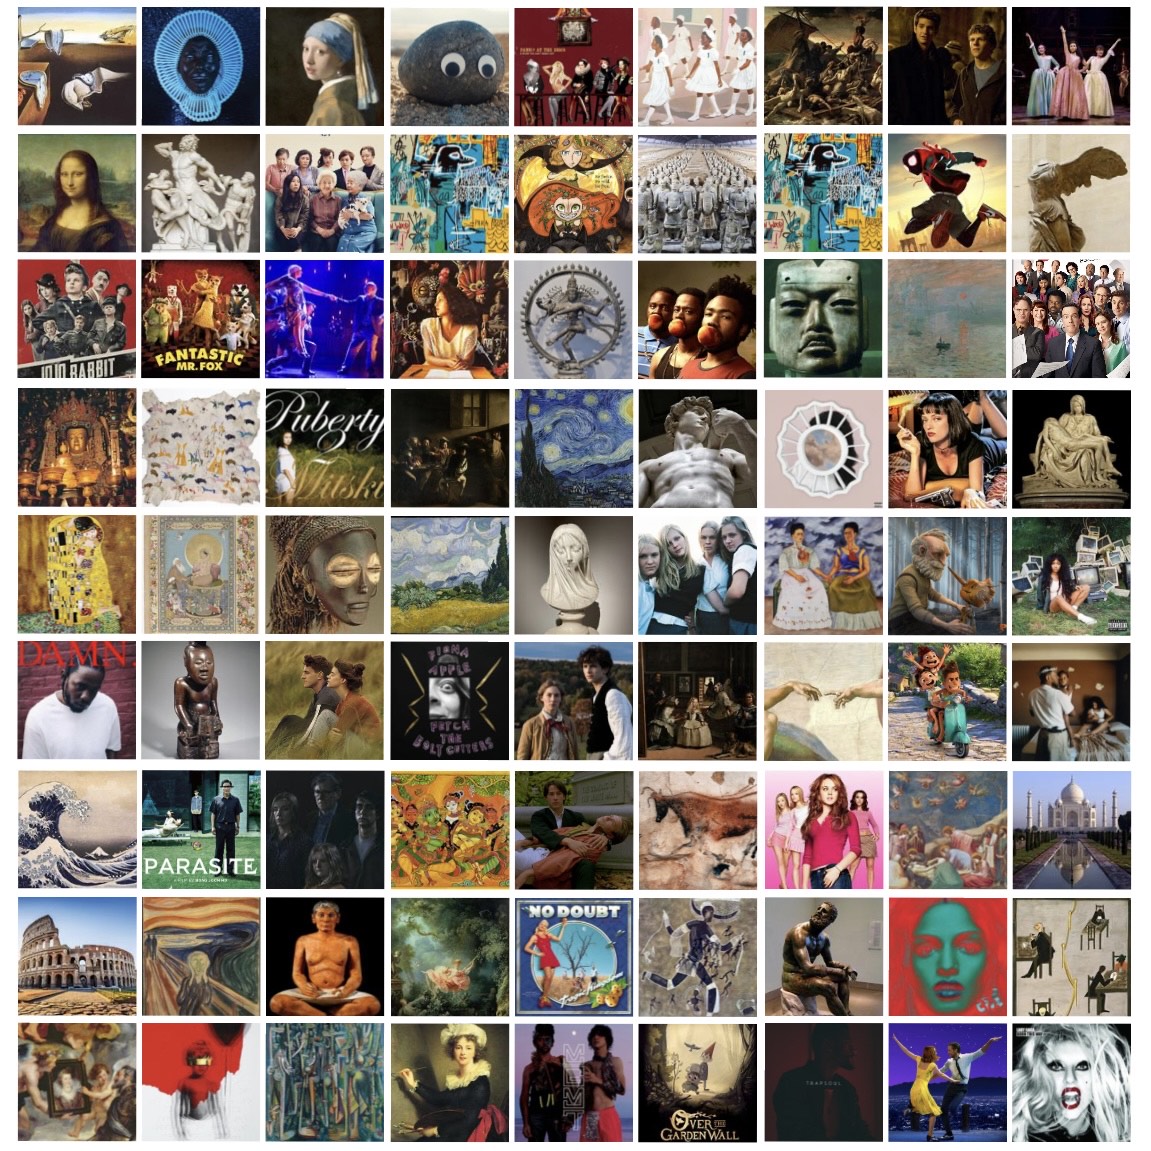 A collage of well known art pieces from various cultures around the world